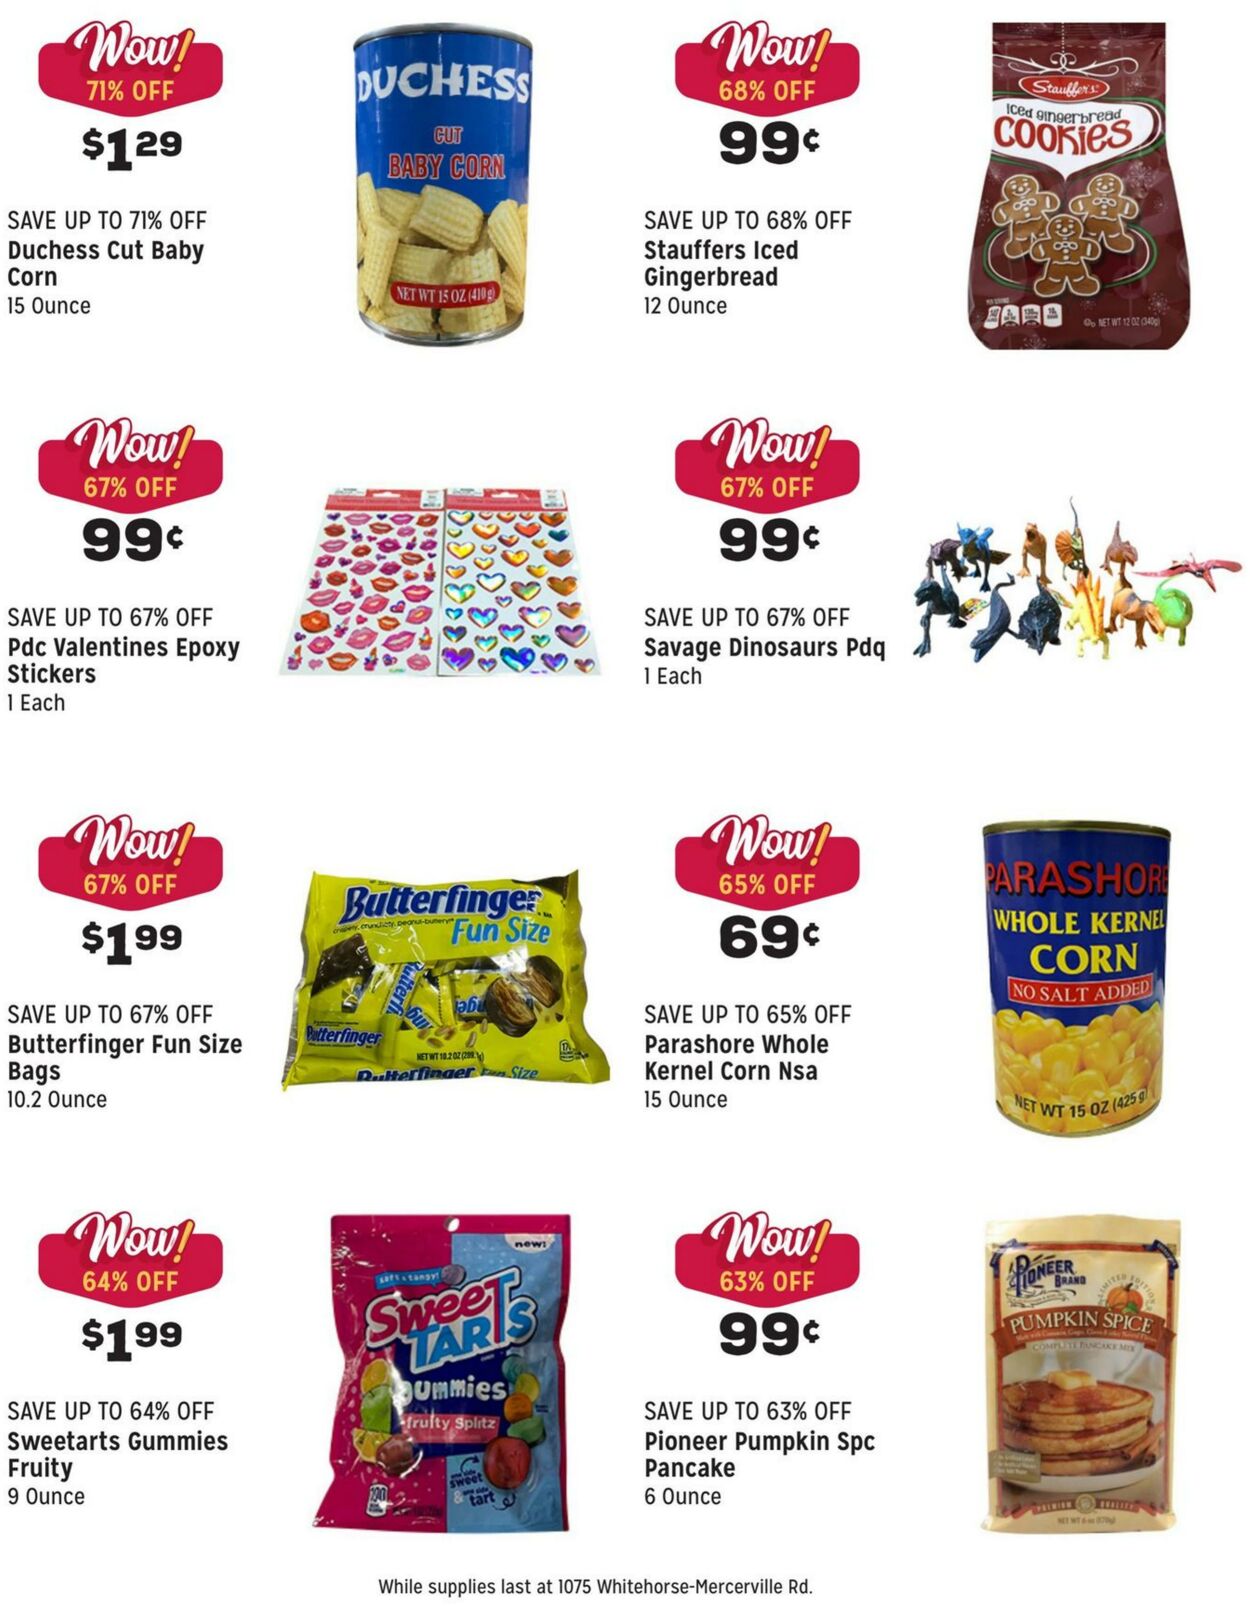 Weekly ad Grocery Outlet 02/14/2024 - 02/20/2024